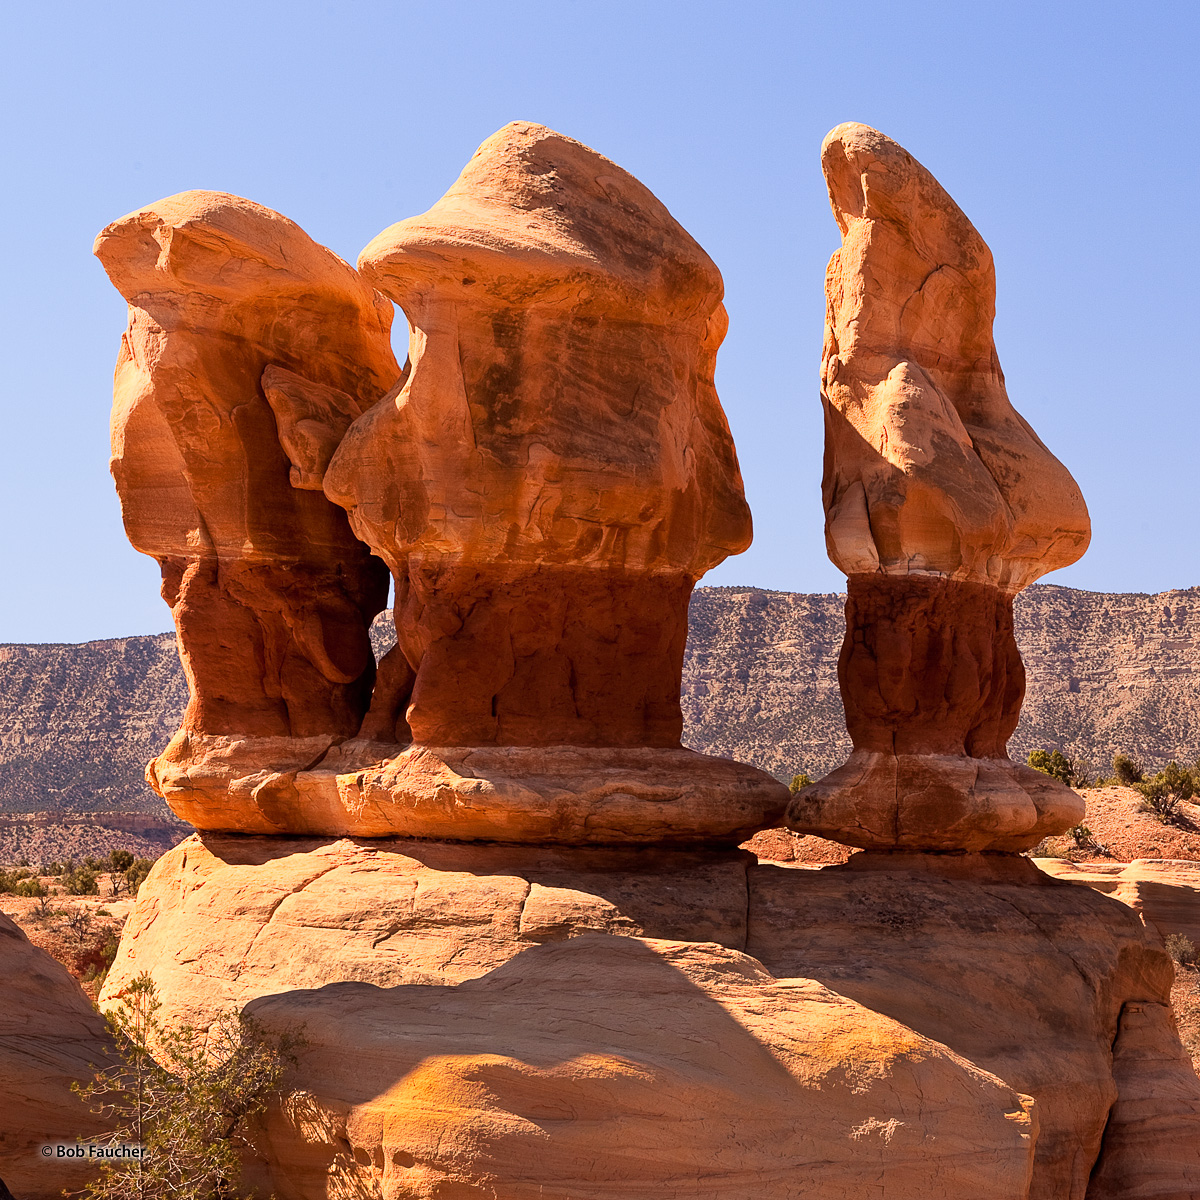 Fanciful and reminiscent of the Disney dwarfs, these hoodoos overlook Devils Garden